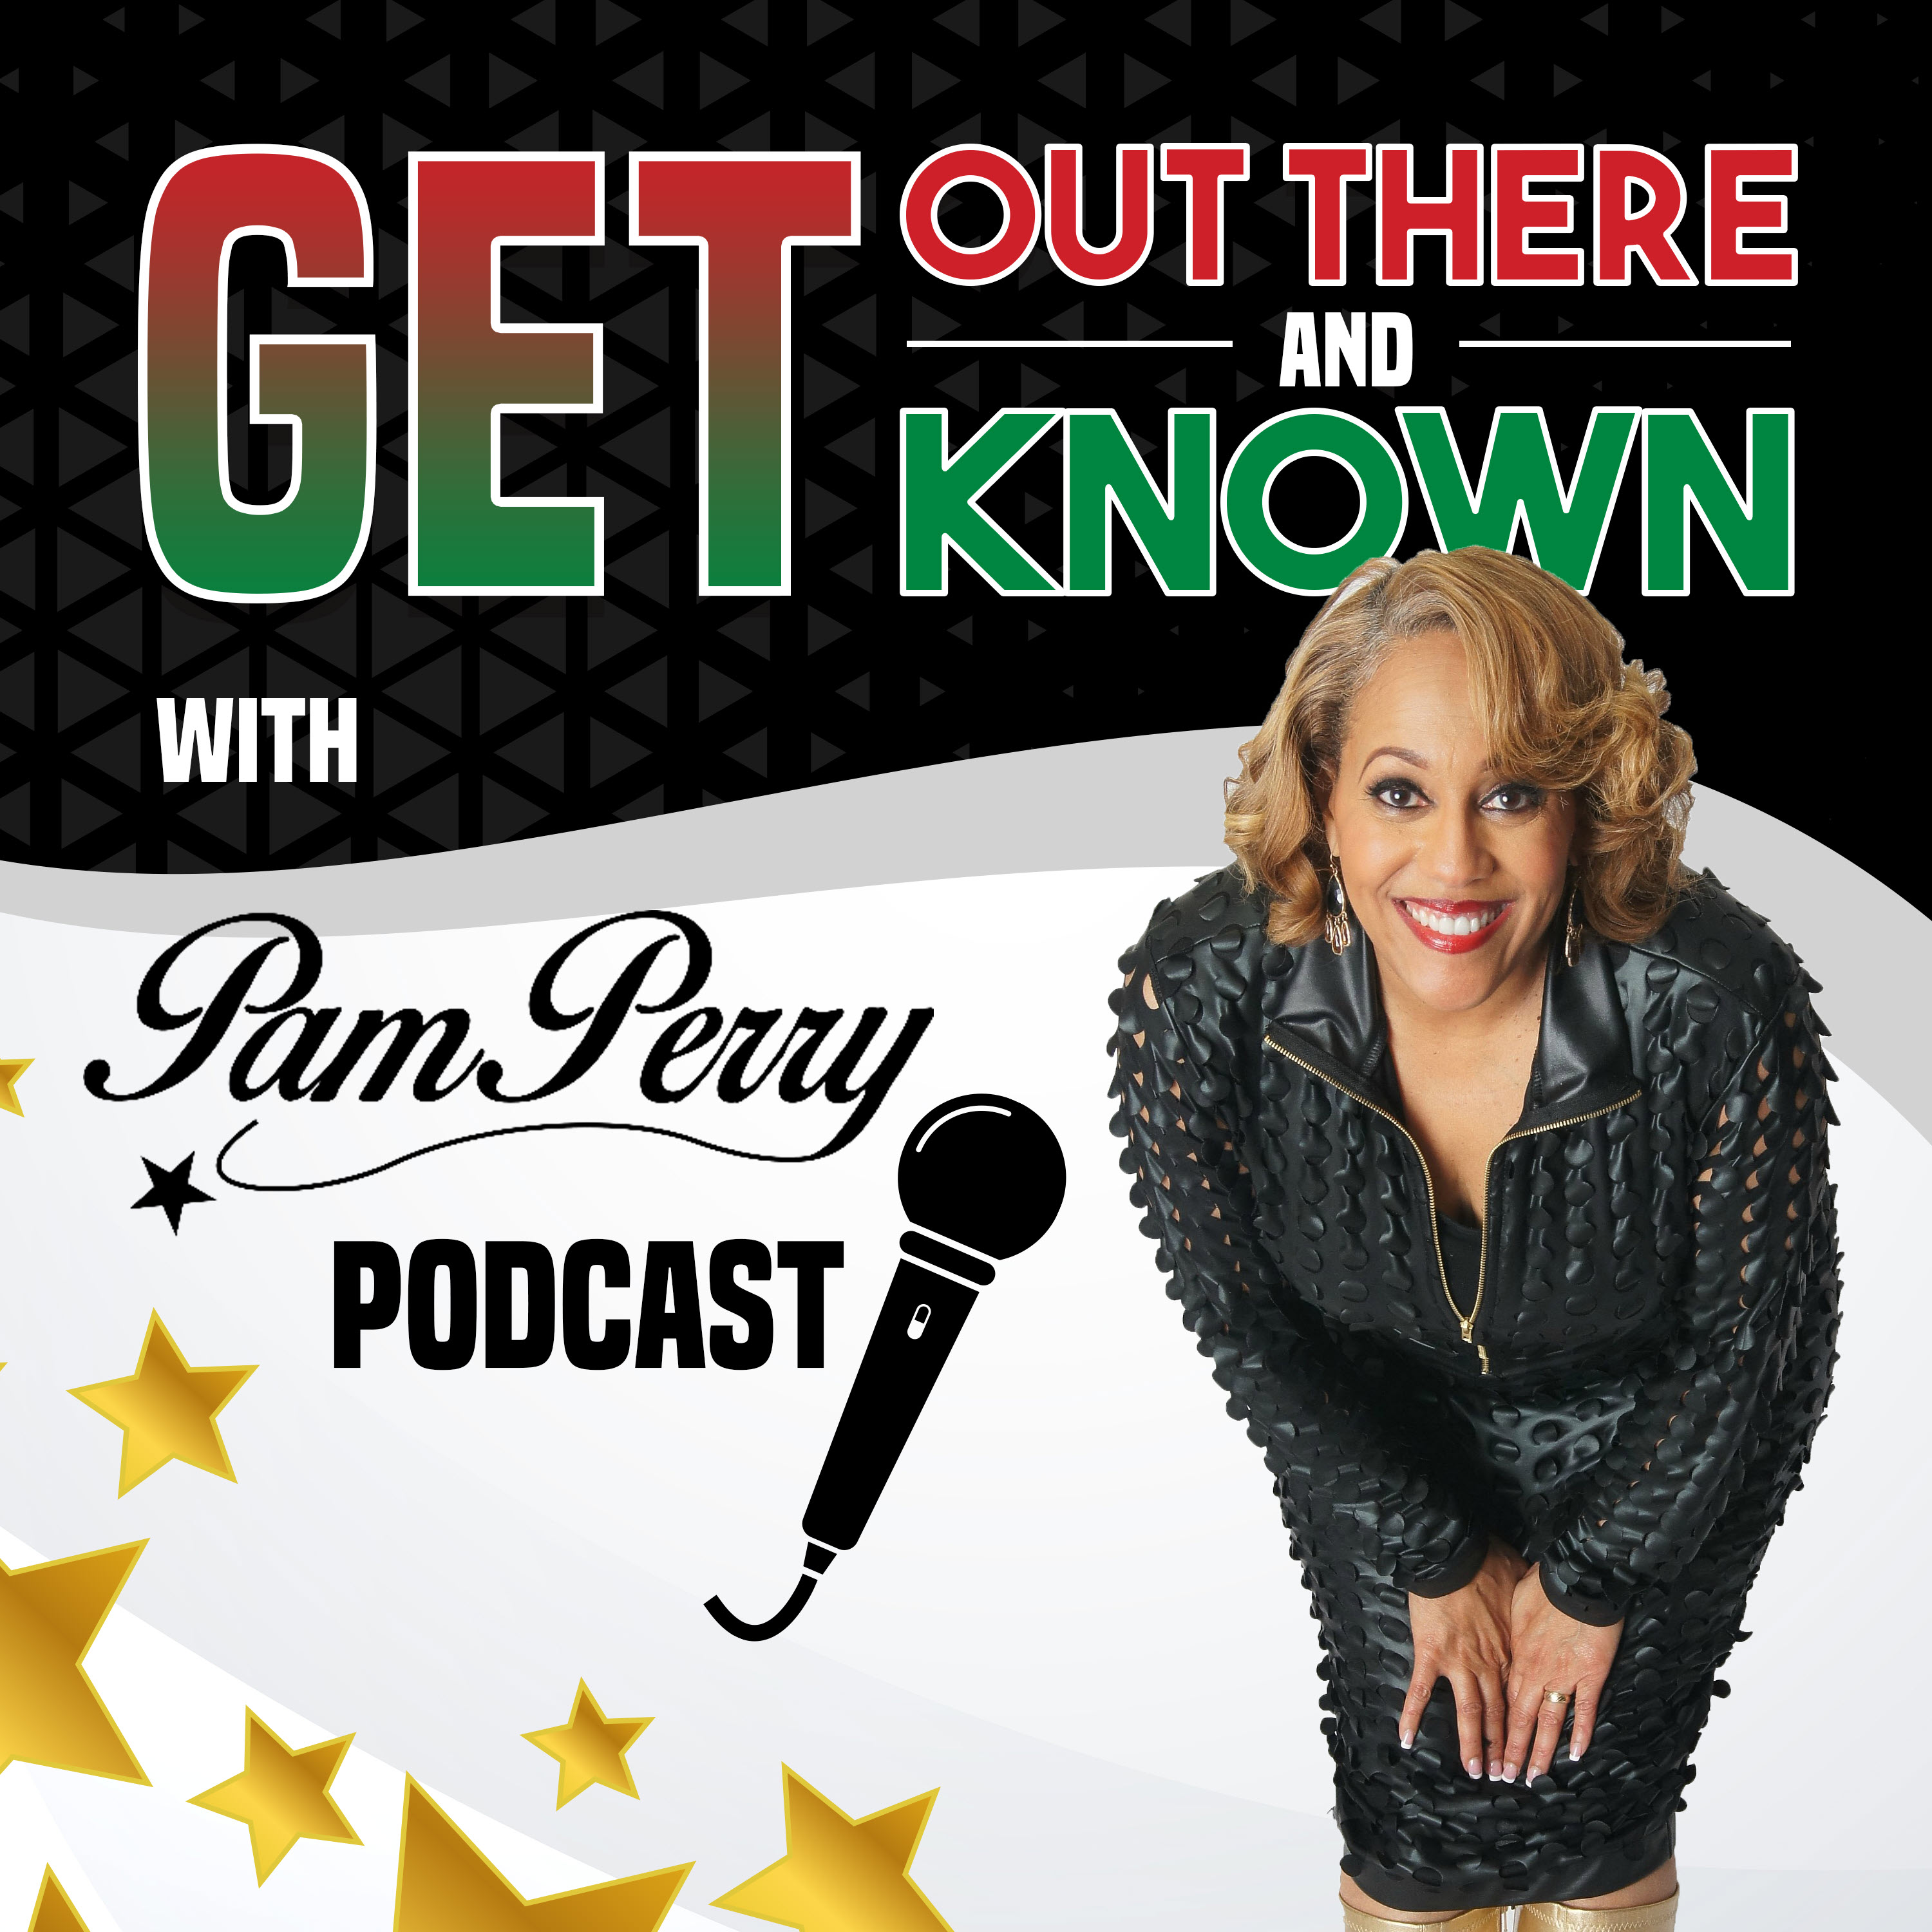 A highlight from Episode 58: Are You Ready to Be on TV? with Lynn Smith